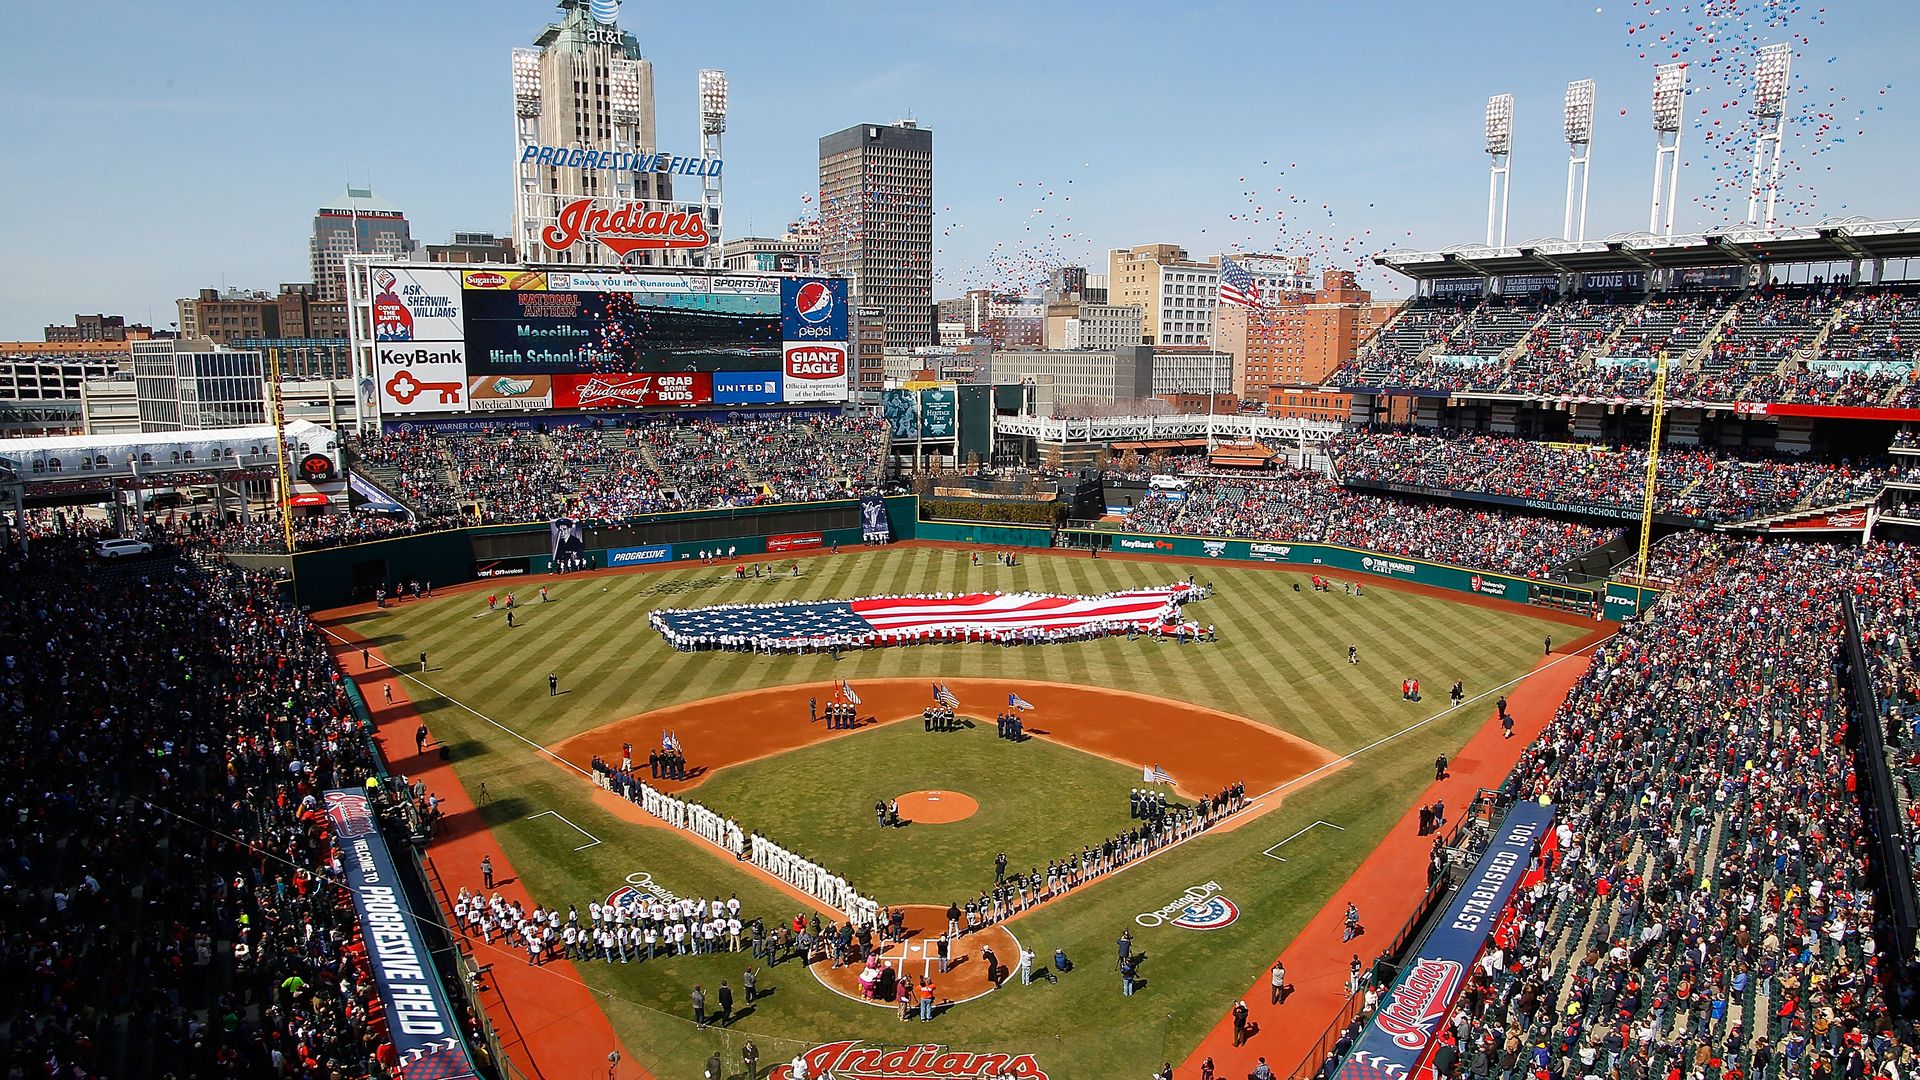 Progressive Field on Opening Day 2011, with confetti in the air. 